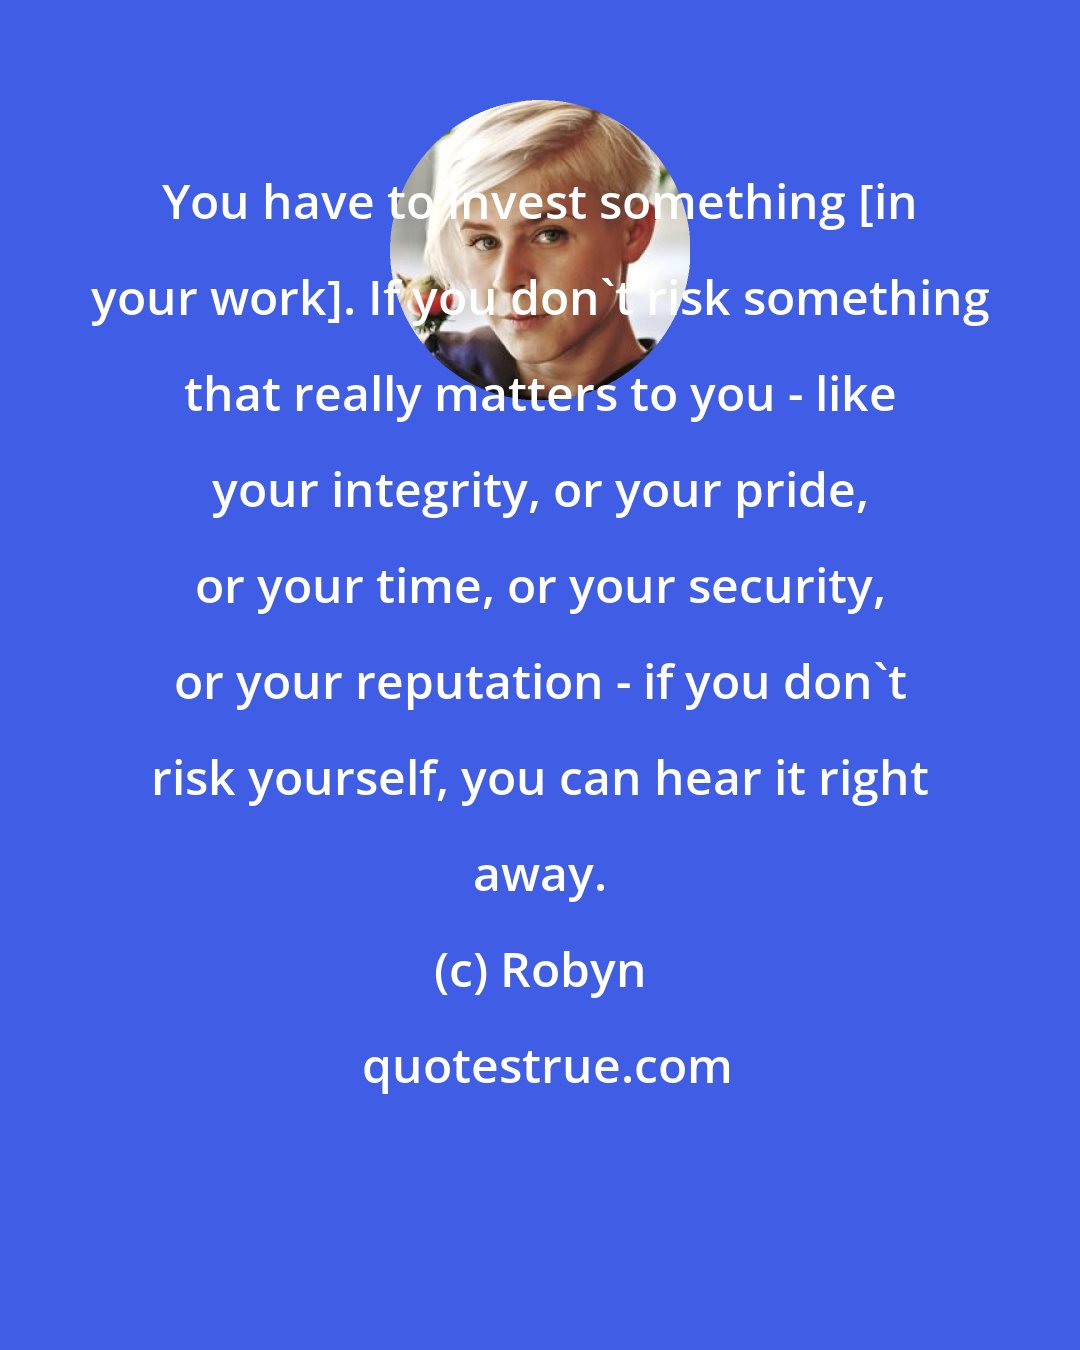 Robyn: You have to invest something [in your work]. If you don't risk something that really matters to you - like your integrity, or your pride, or your time, or your security, or your reputation - if you don't risk yourself, you can hear it right away.